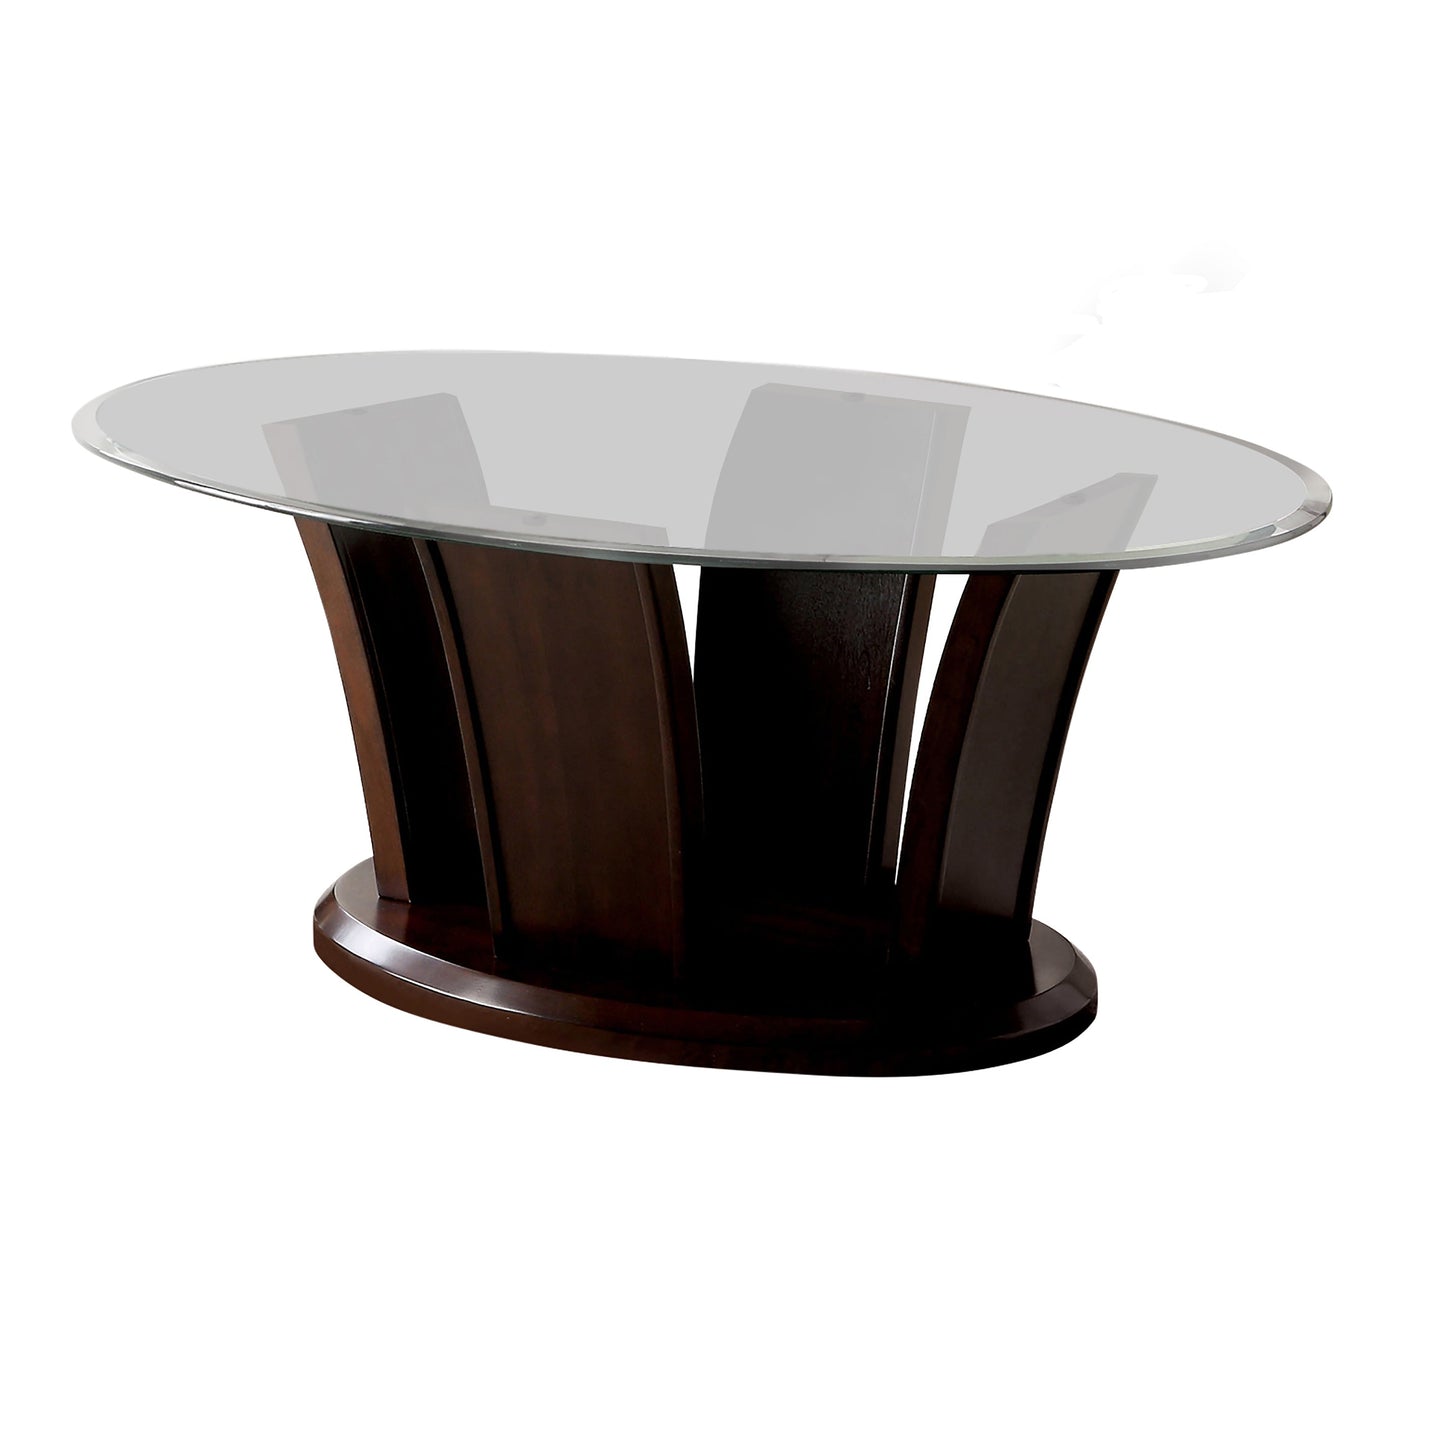 Jillyn Contemporary Glass Top Coffee Table in Dark Cherry